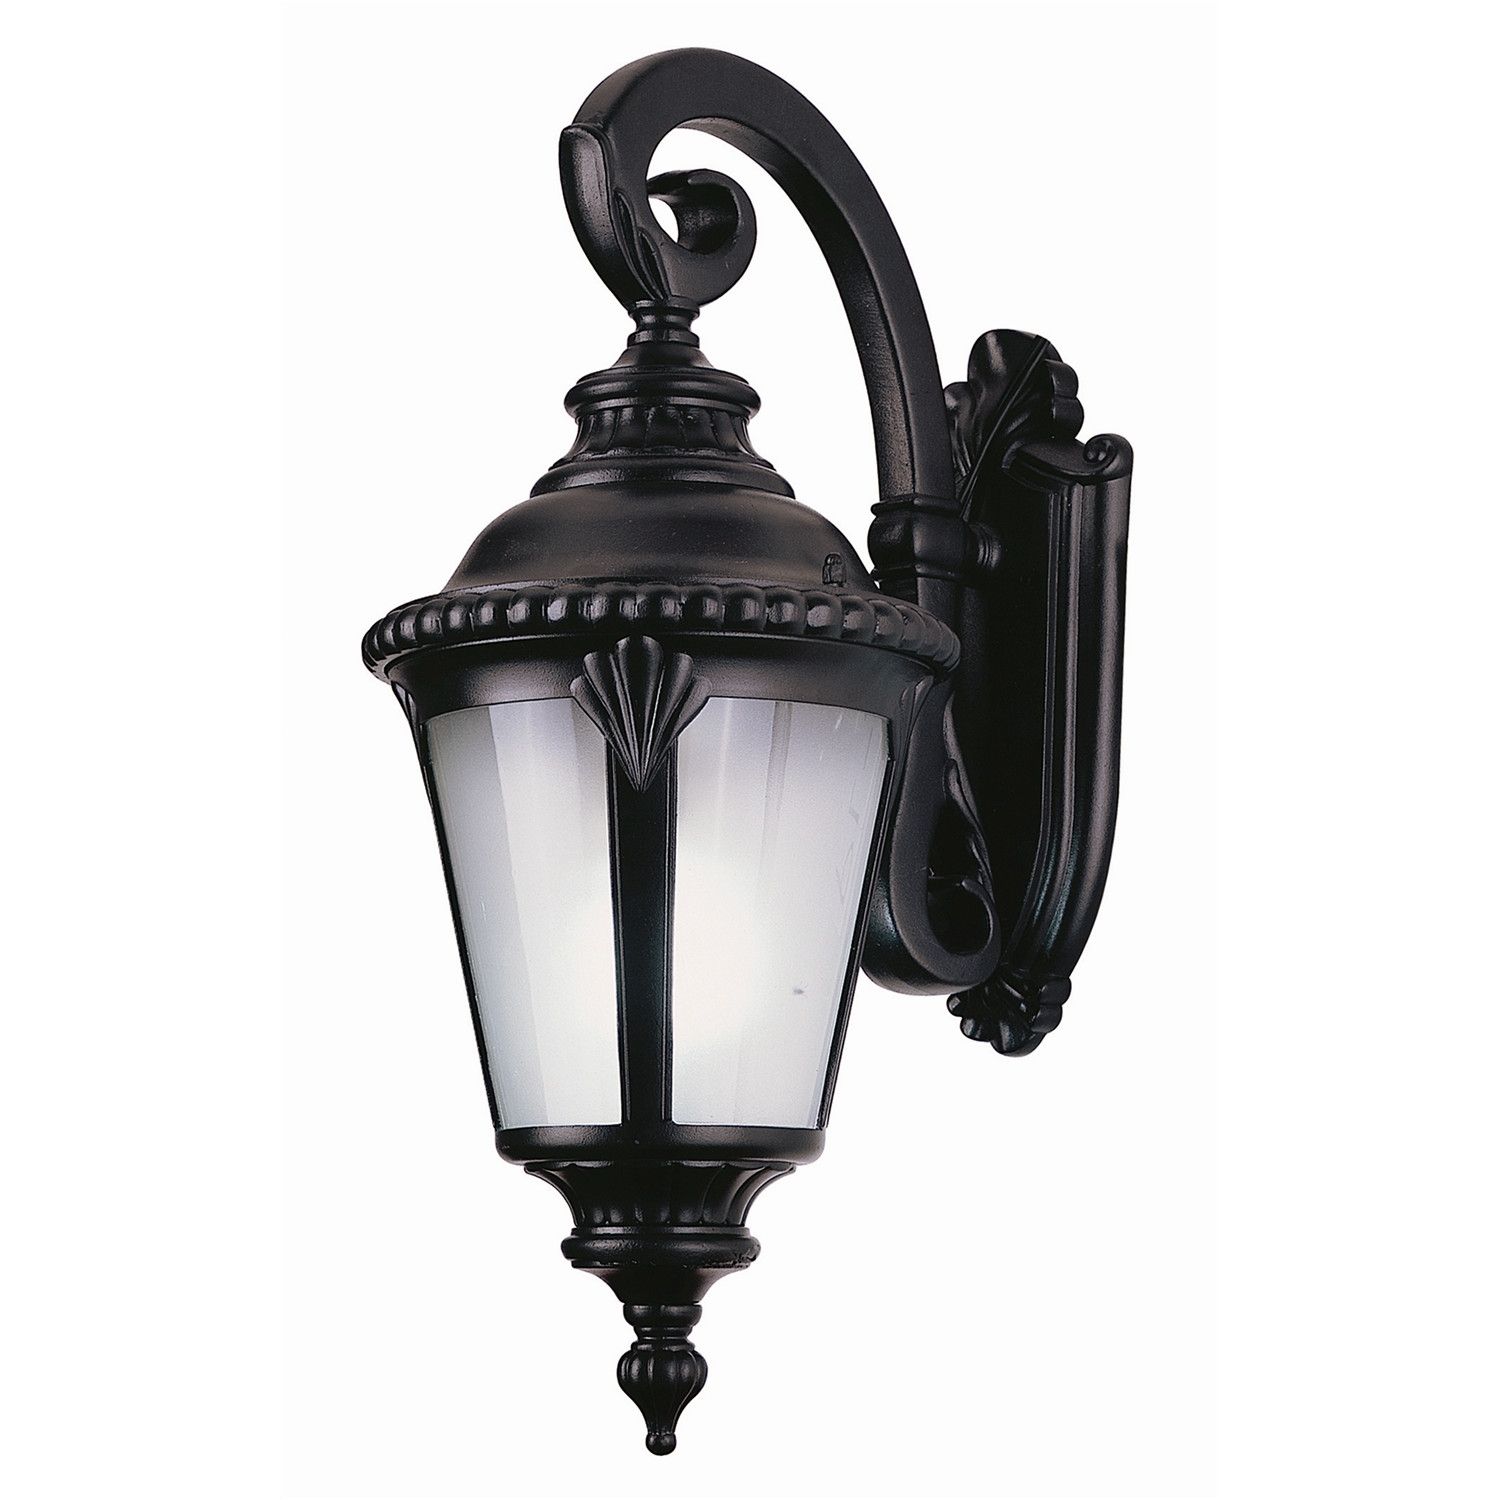 Lighting & Lamps: Trans Globe Lighting 4184 Bk Outdoor Sconce For Outdoor Wall Lantern By Transglobe Lighting (View 9 of 15)